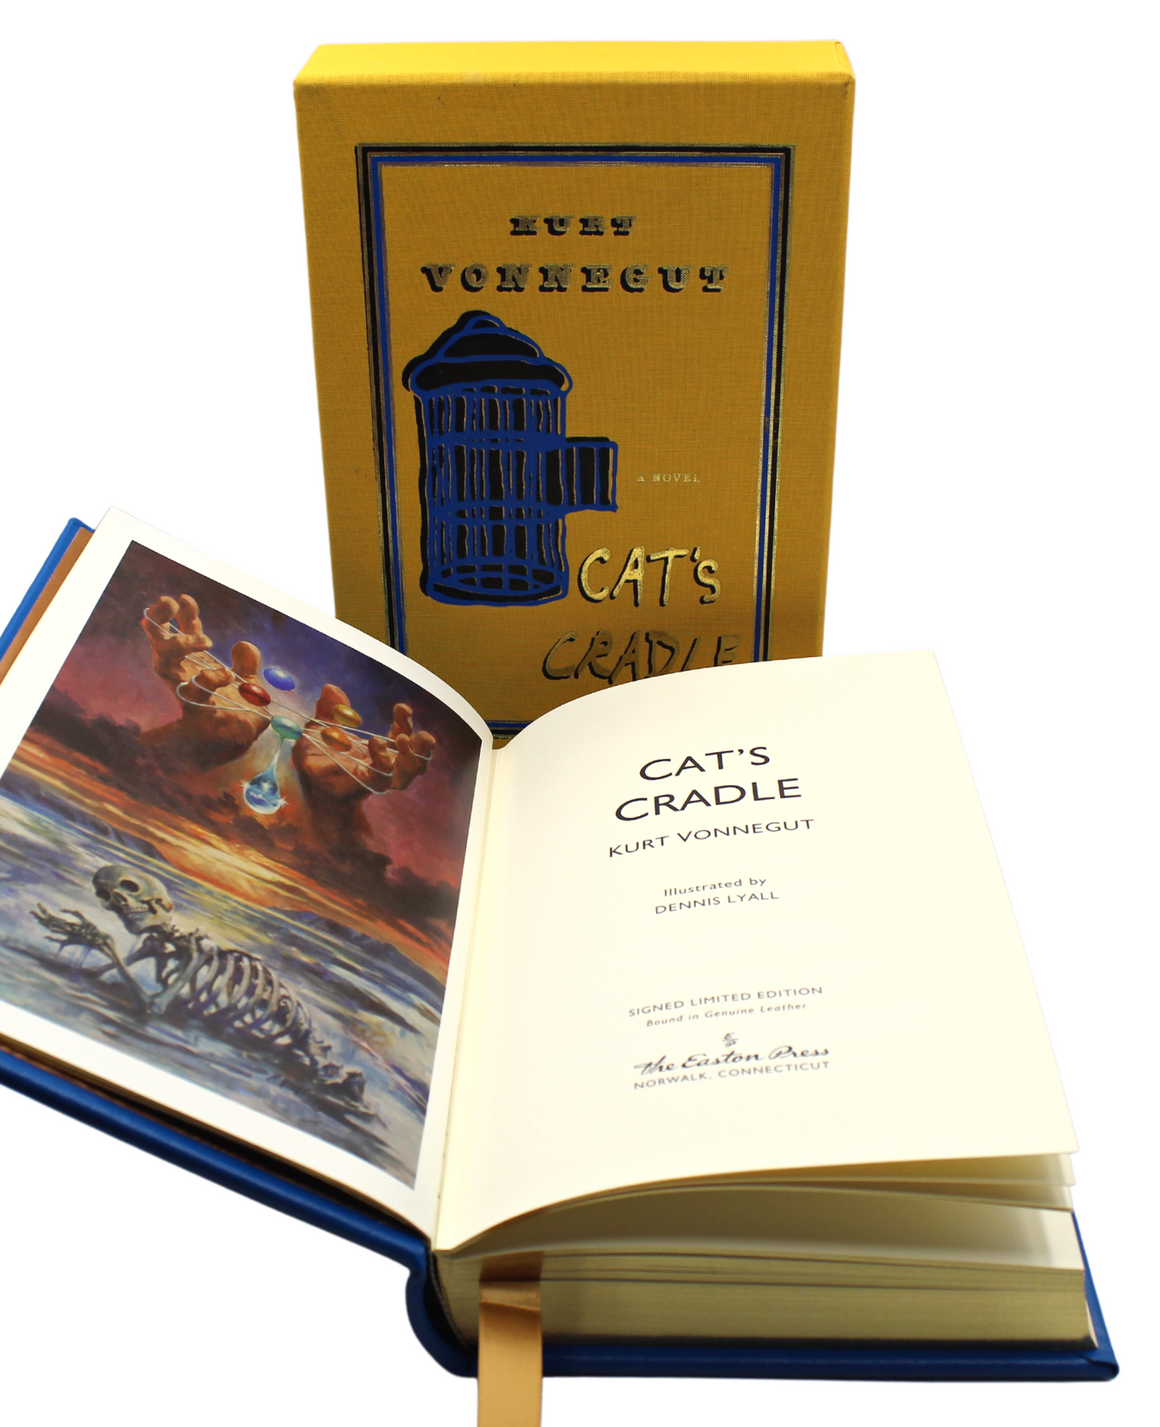 The novel and slipcase pictured together, with the novel set in front of the slipcase. The novel is bound in blue leather, with the cover art printed in yellow, black, and gold. "Kurt Vonnegut" is printed top center, featuring a  yellow and black quirky illustration of an open birdcage in the center. The words "a novel" appear to be coming out of the opened cage door, with the title "Cat's Cradle" printed underneath in a gold and black type.